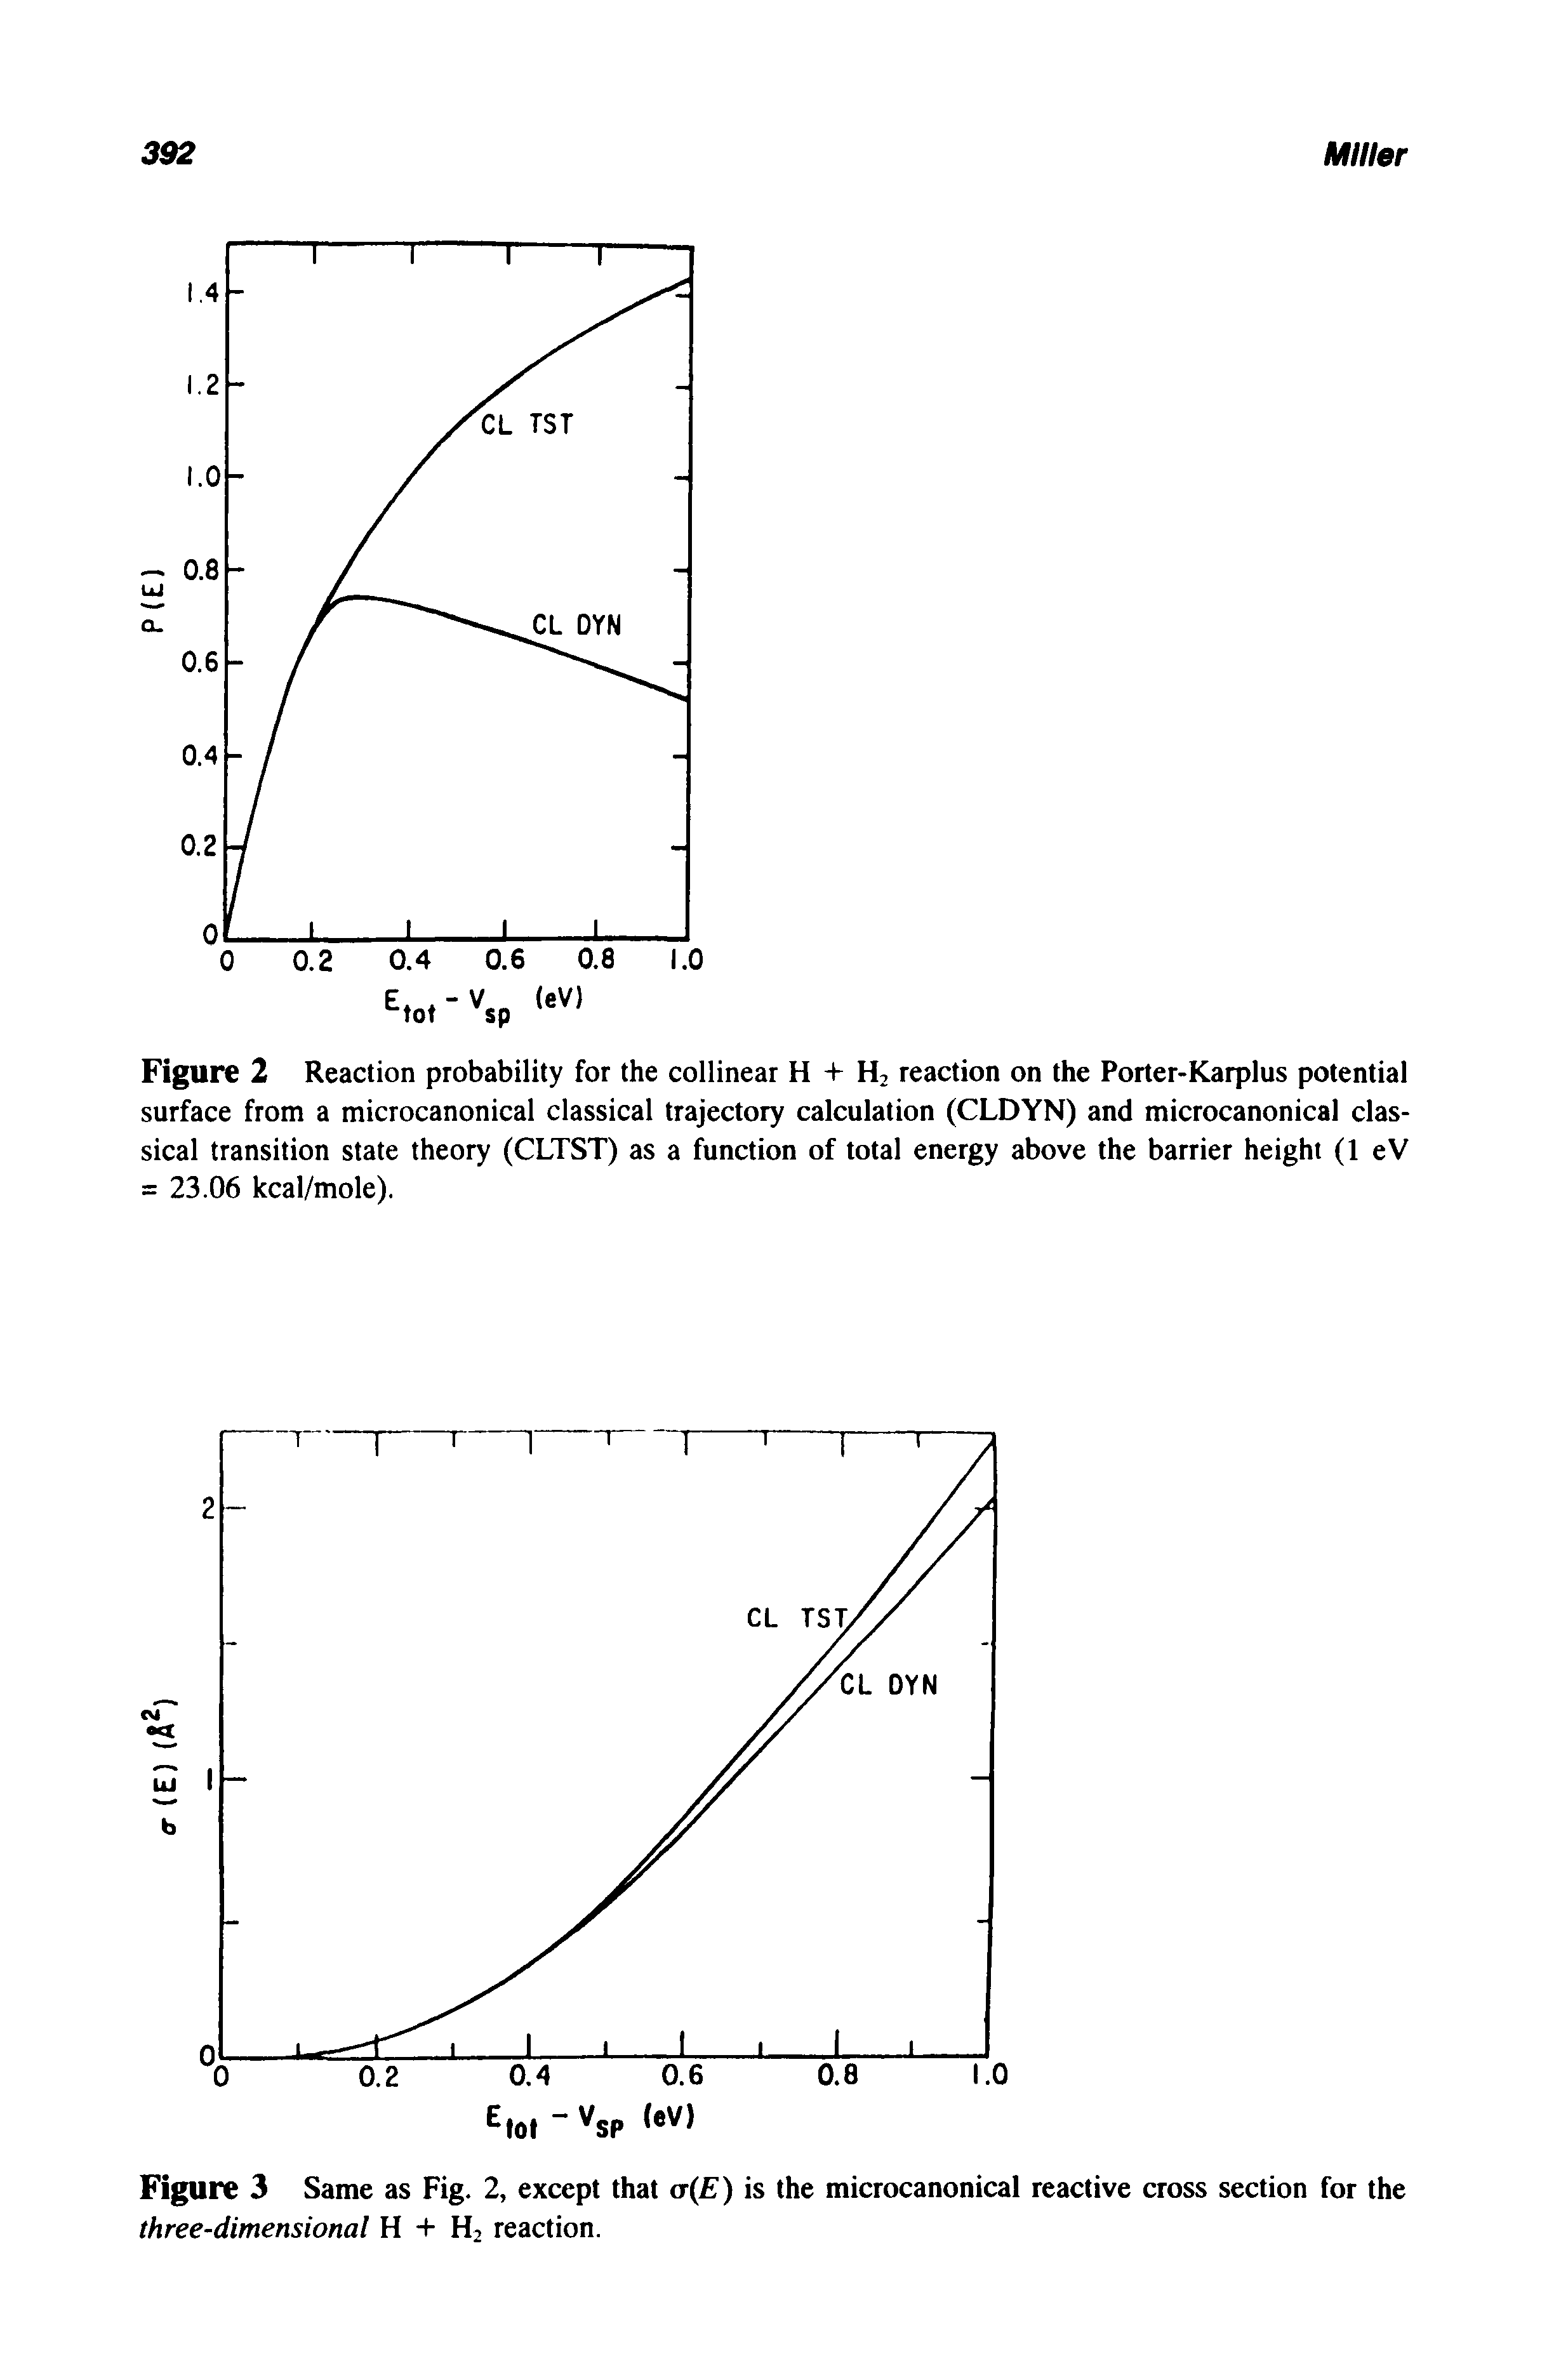 Figure 2 Reaction probability for the collinear H + H2 reaction on the Porter-Karplus potential surface from a microcanonical classical trajectory calculation (CLDYN) and microcanonical classical transition state theory (CLTST) as a function of total energy above the barrier height (1 eV = 23.06 kcal/mole).